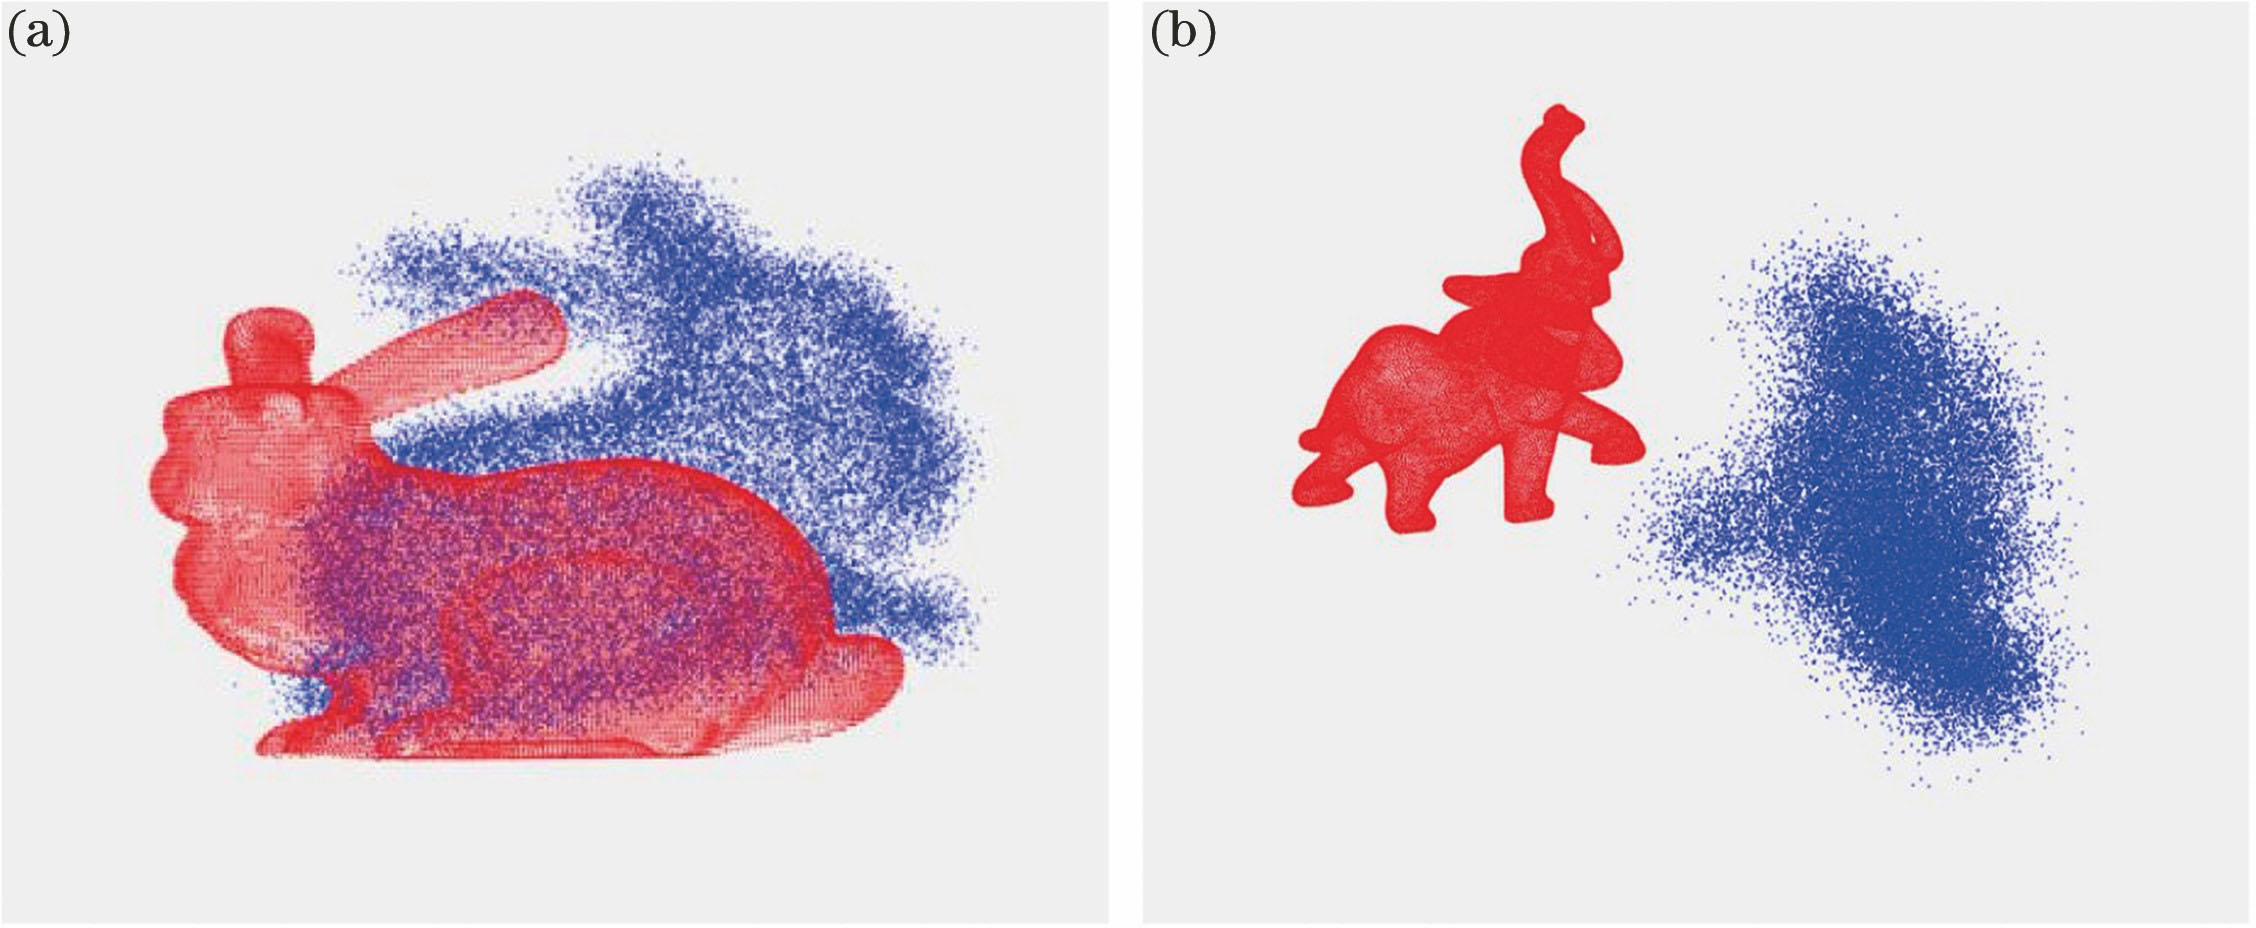 Initial states of point clouds of (a) Bunny and (b) Elephant